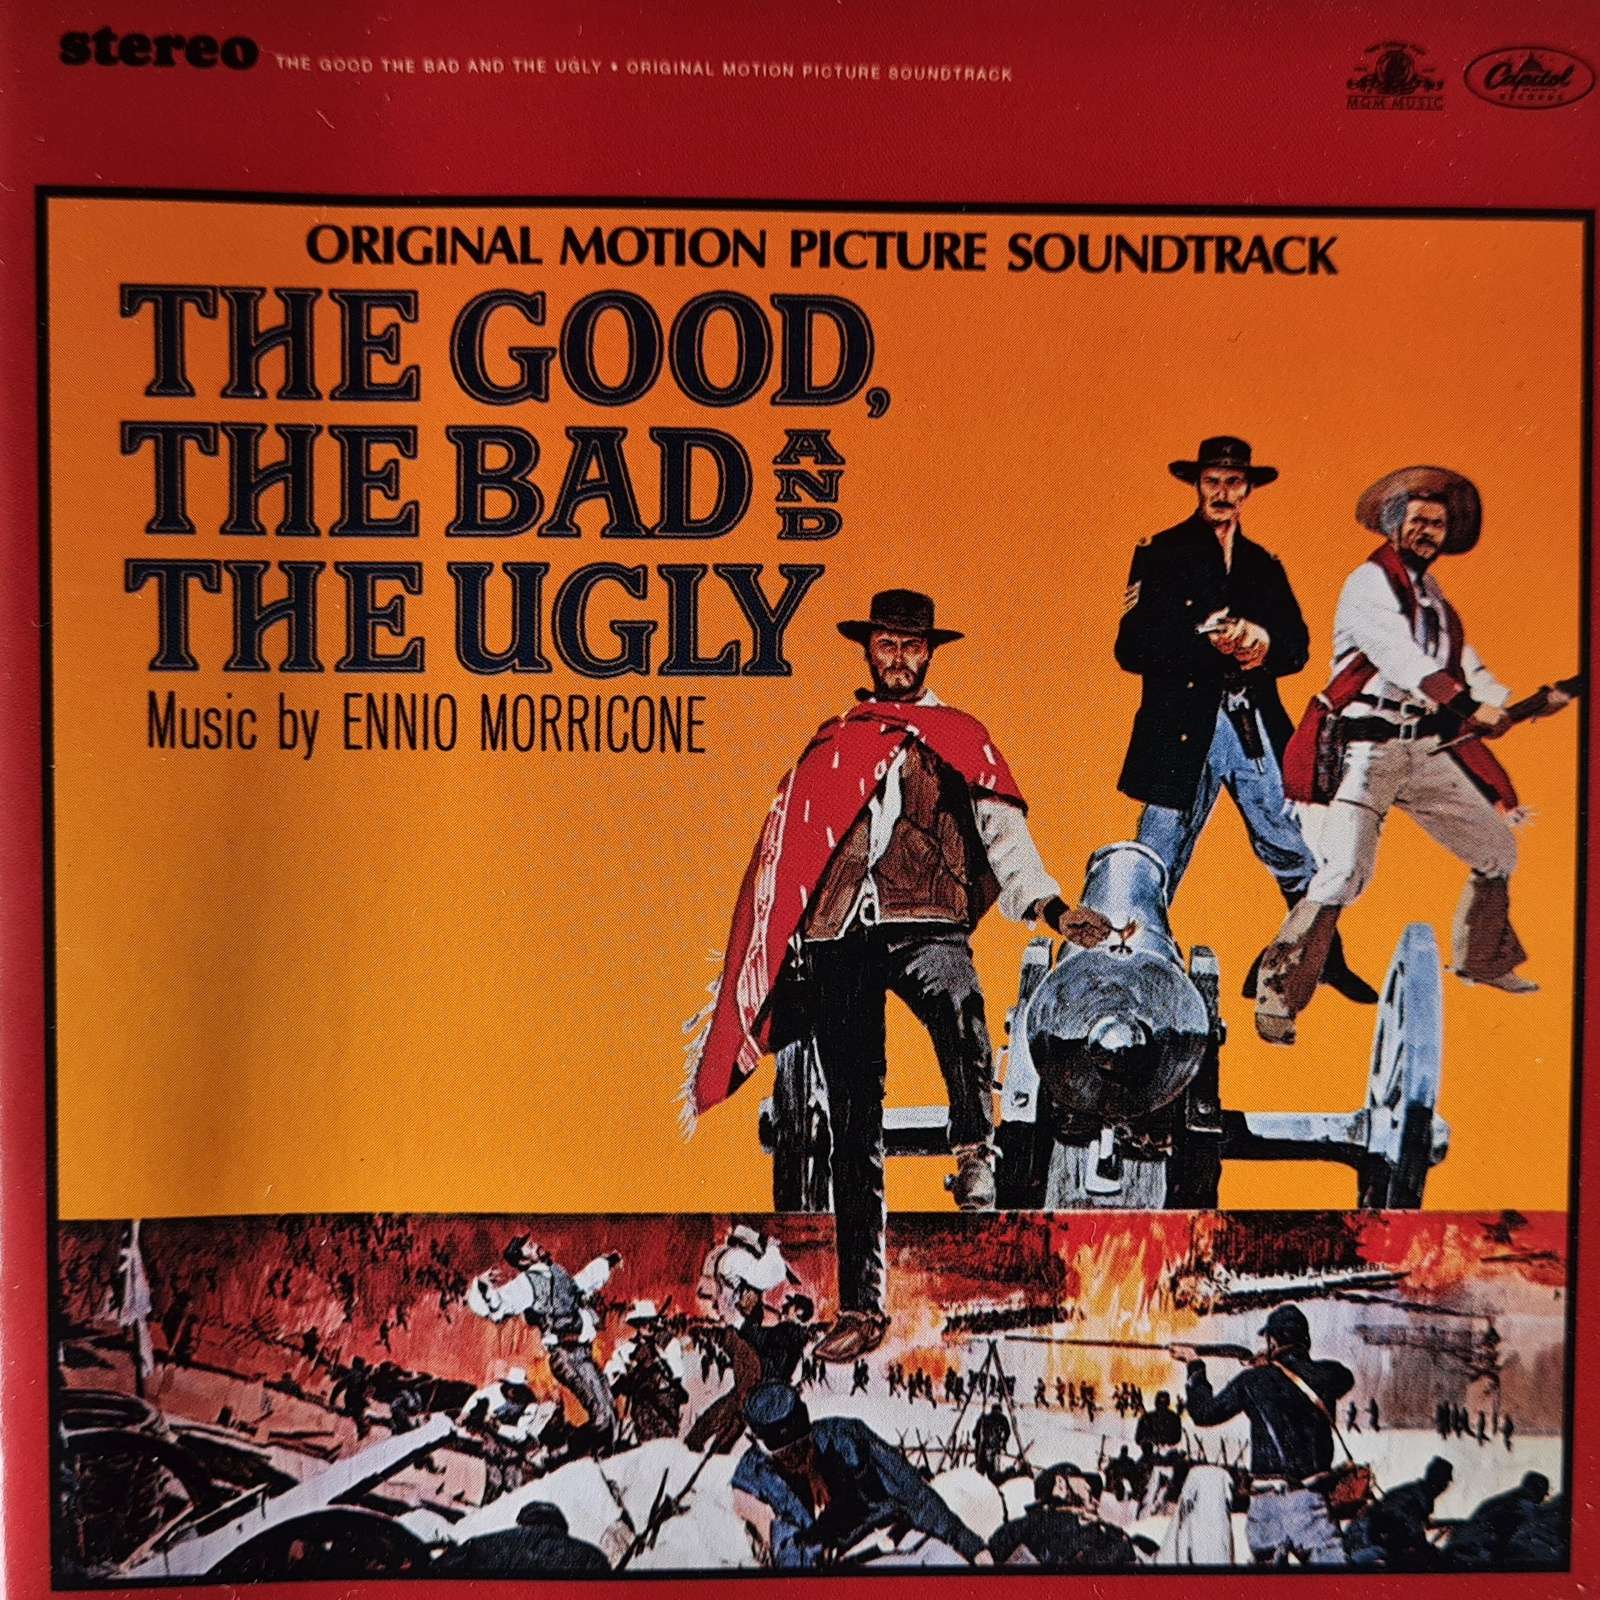 The Good, The Bad and the Ugly - Original Motion Picture Soundtrack (CD)